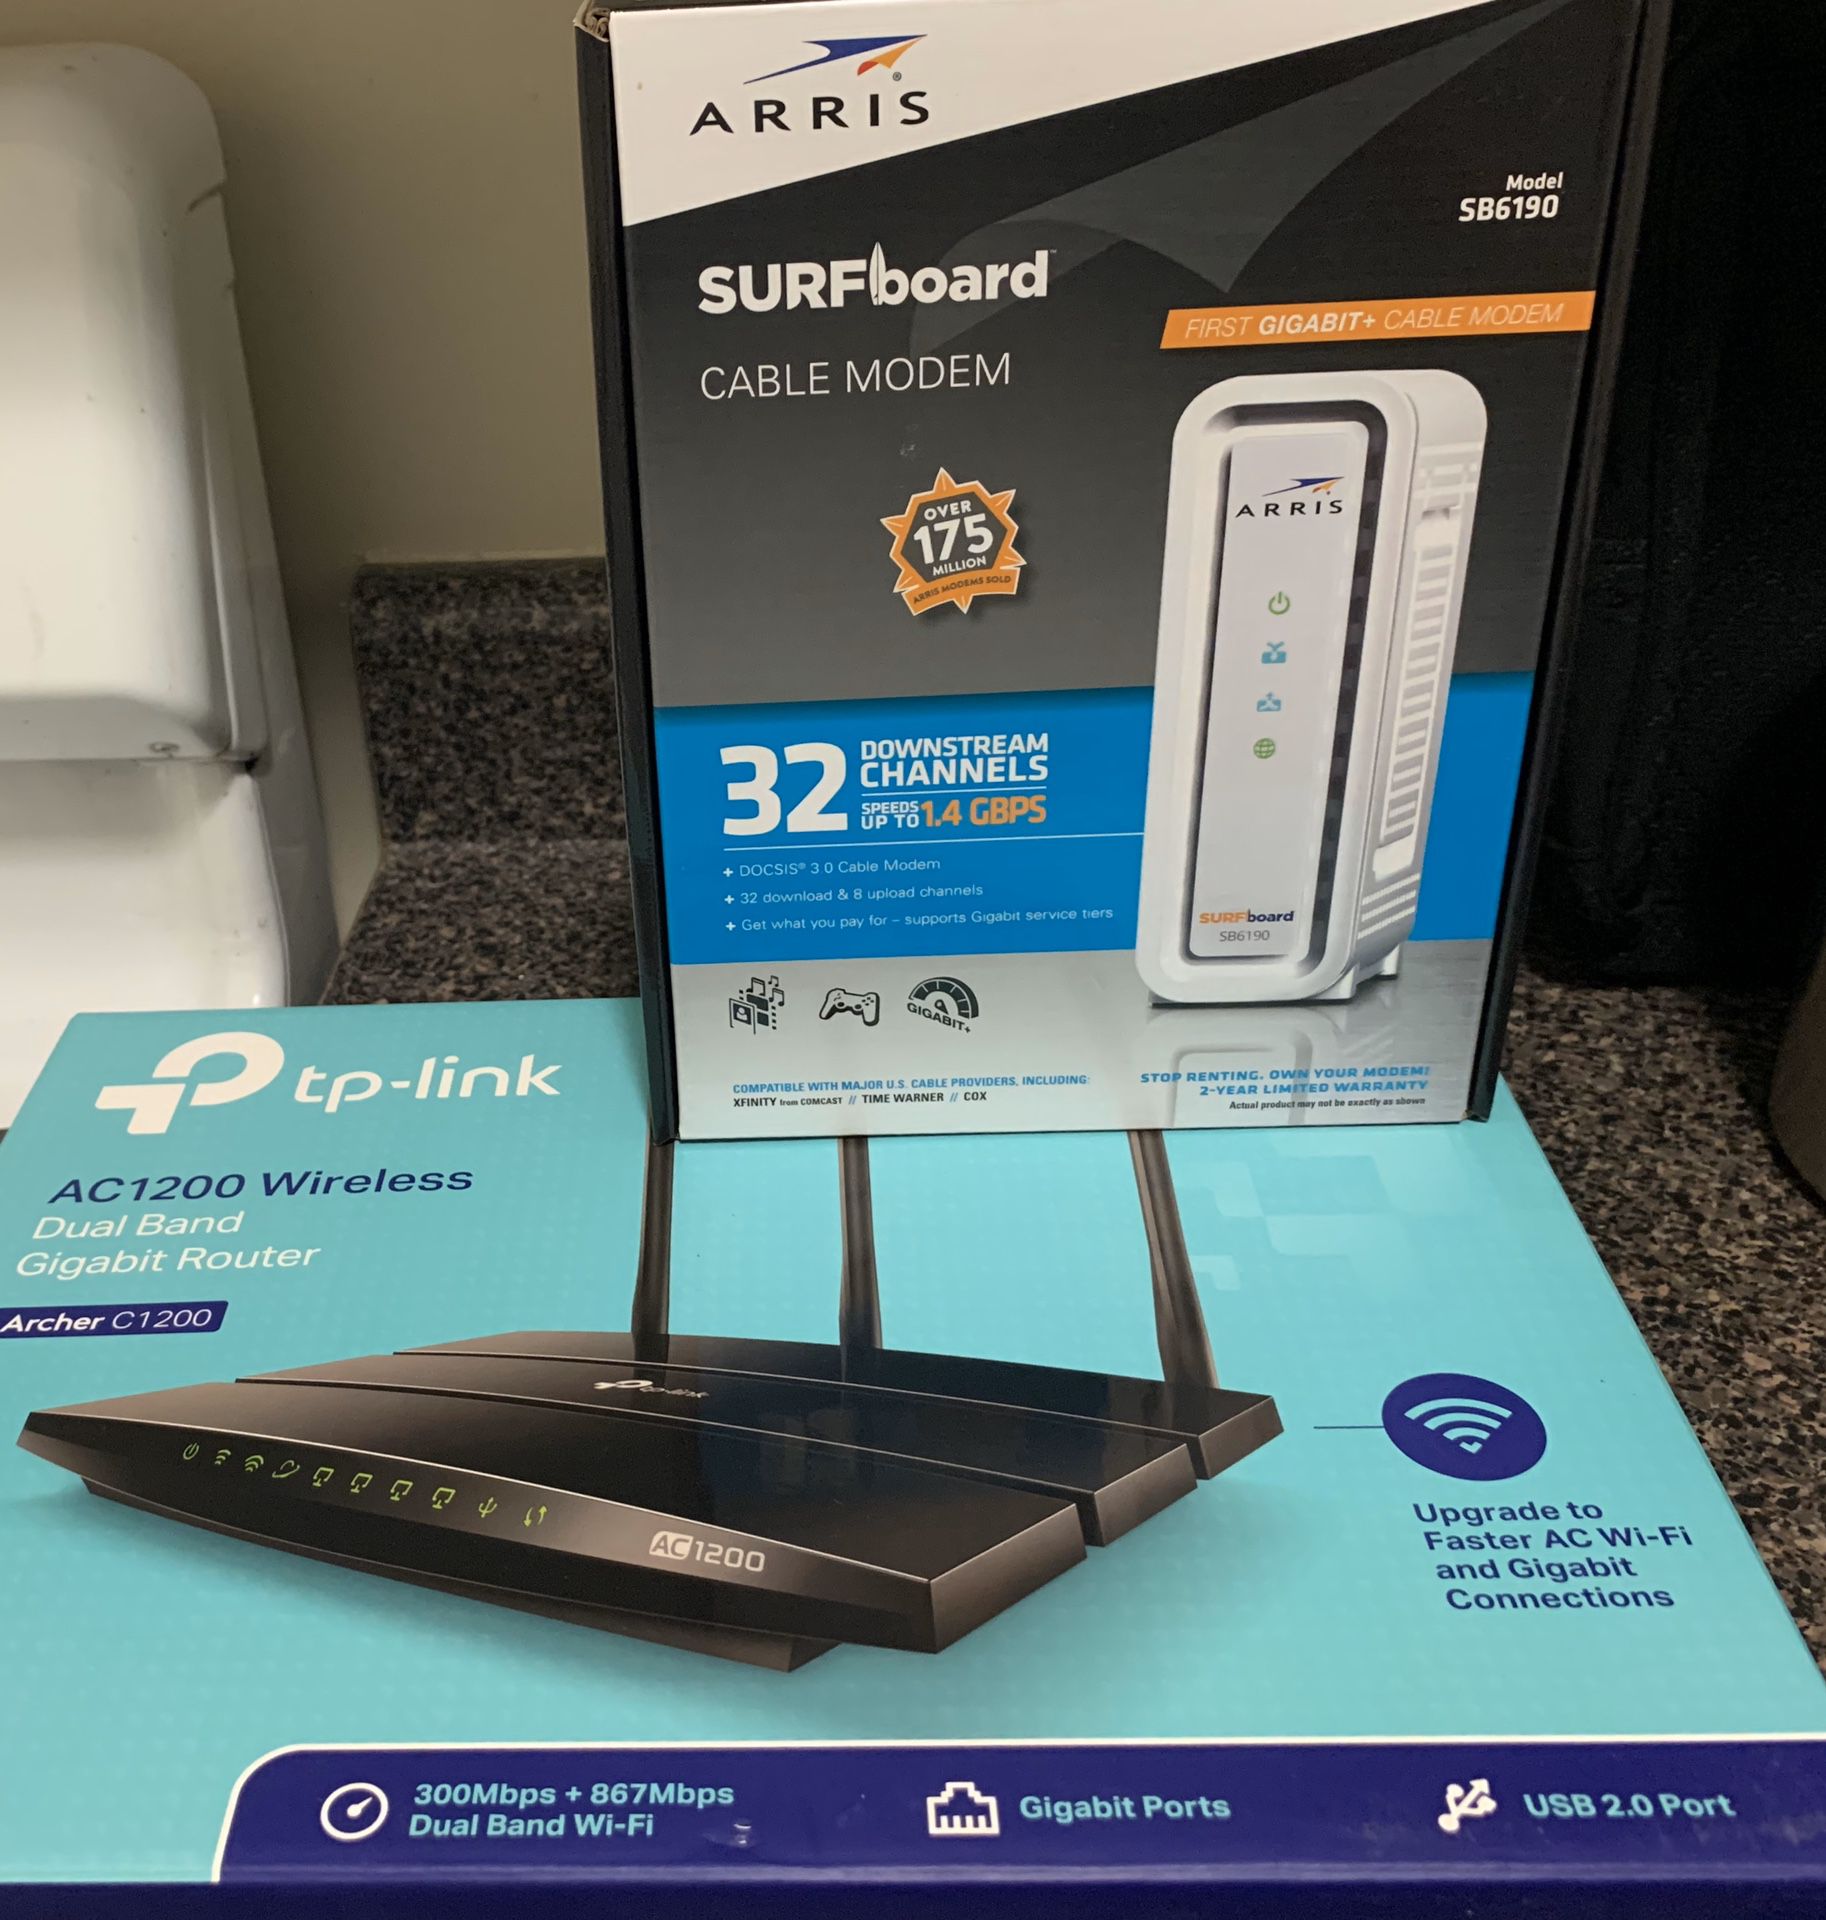 I’m moving out soon! I’m looking to sell my RCN-approved router and modem for $50.